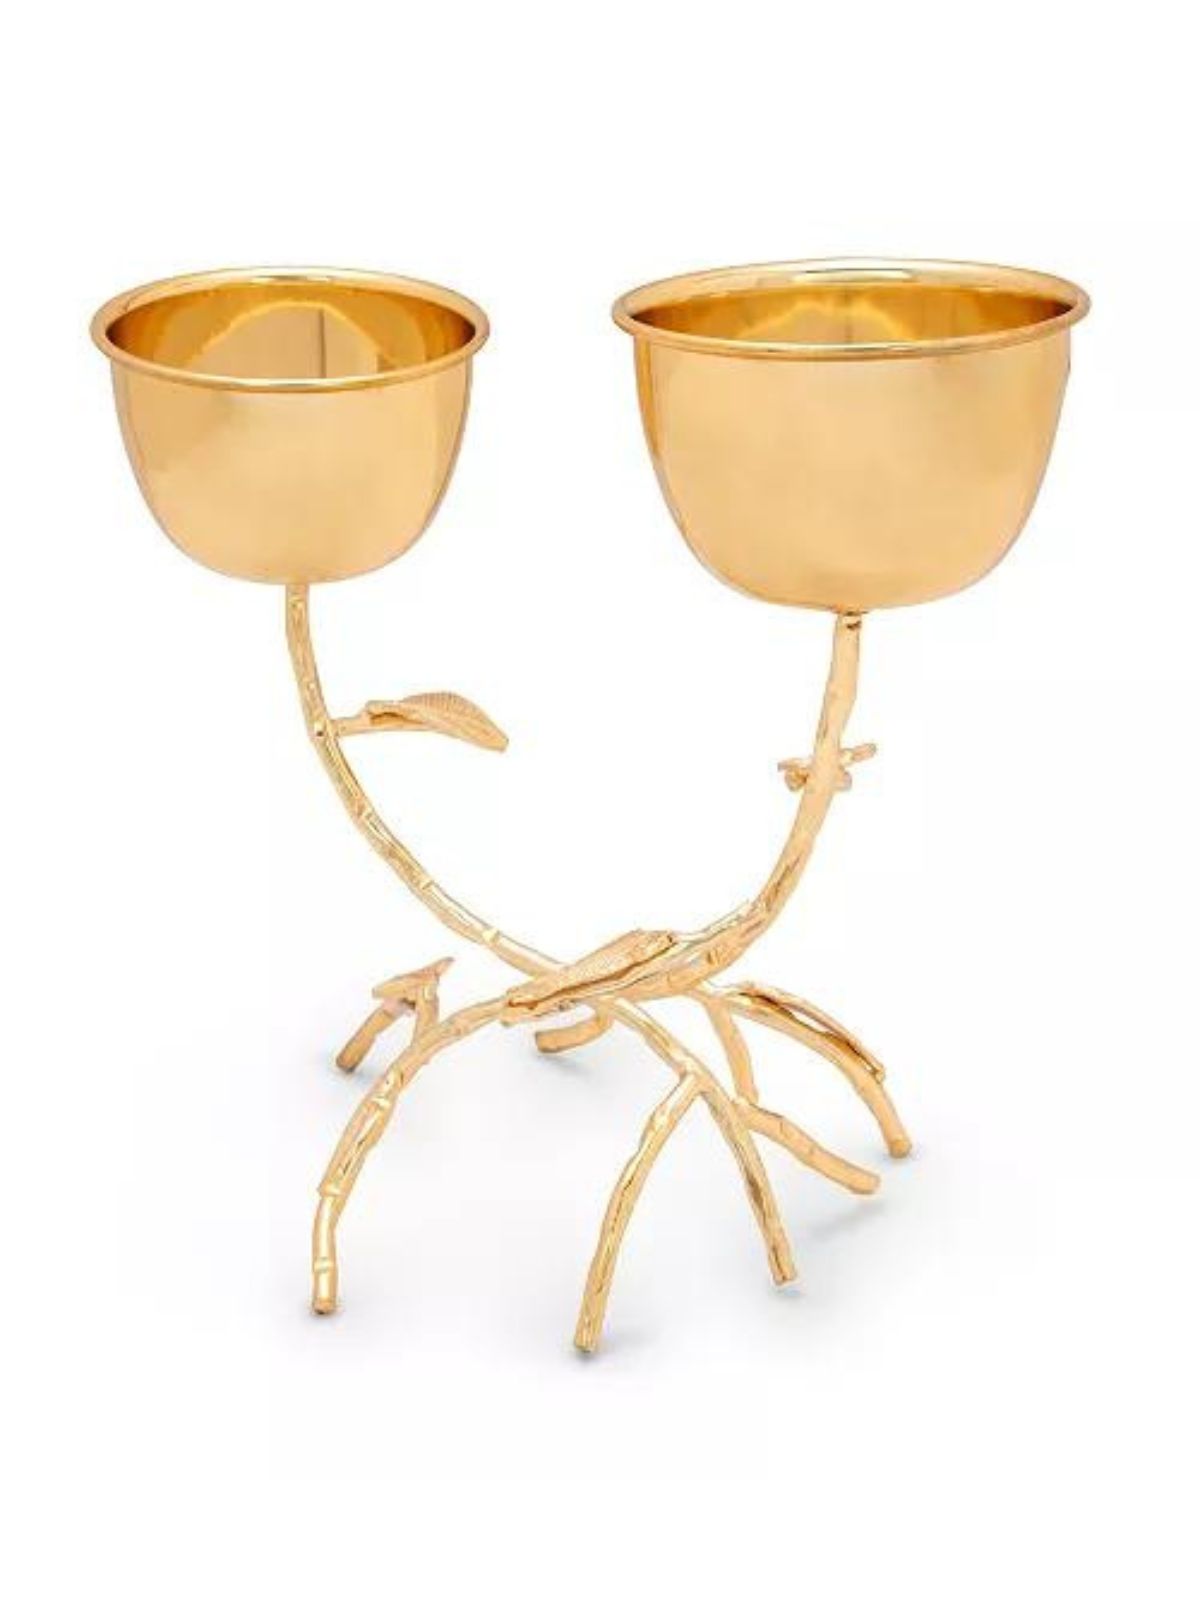 This 13.75in 2 branch dish was created from fine stainless steel and decorated with a branch and leaf design. The versatile branch adds a bold presence to any table top decor. Sold by KYA Home Decor